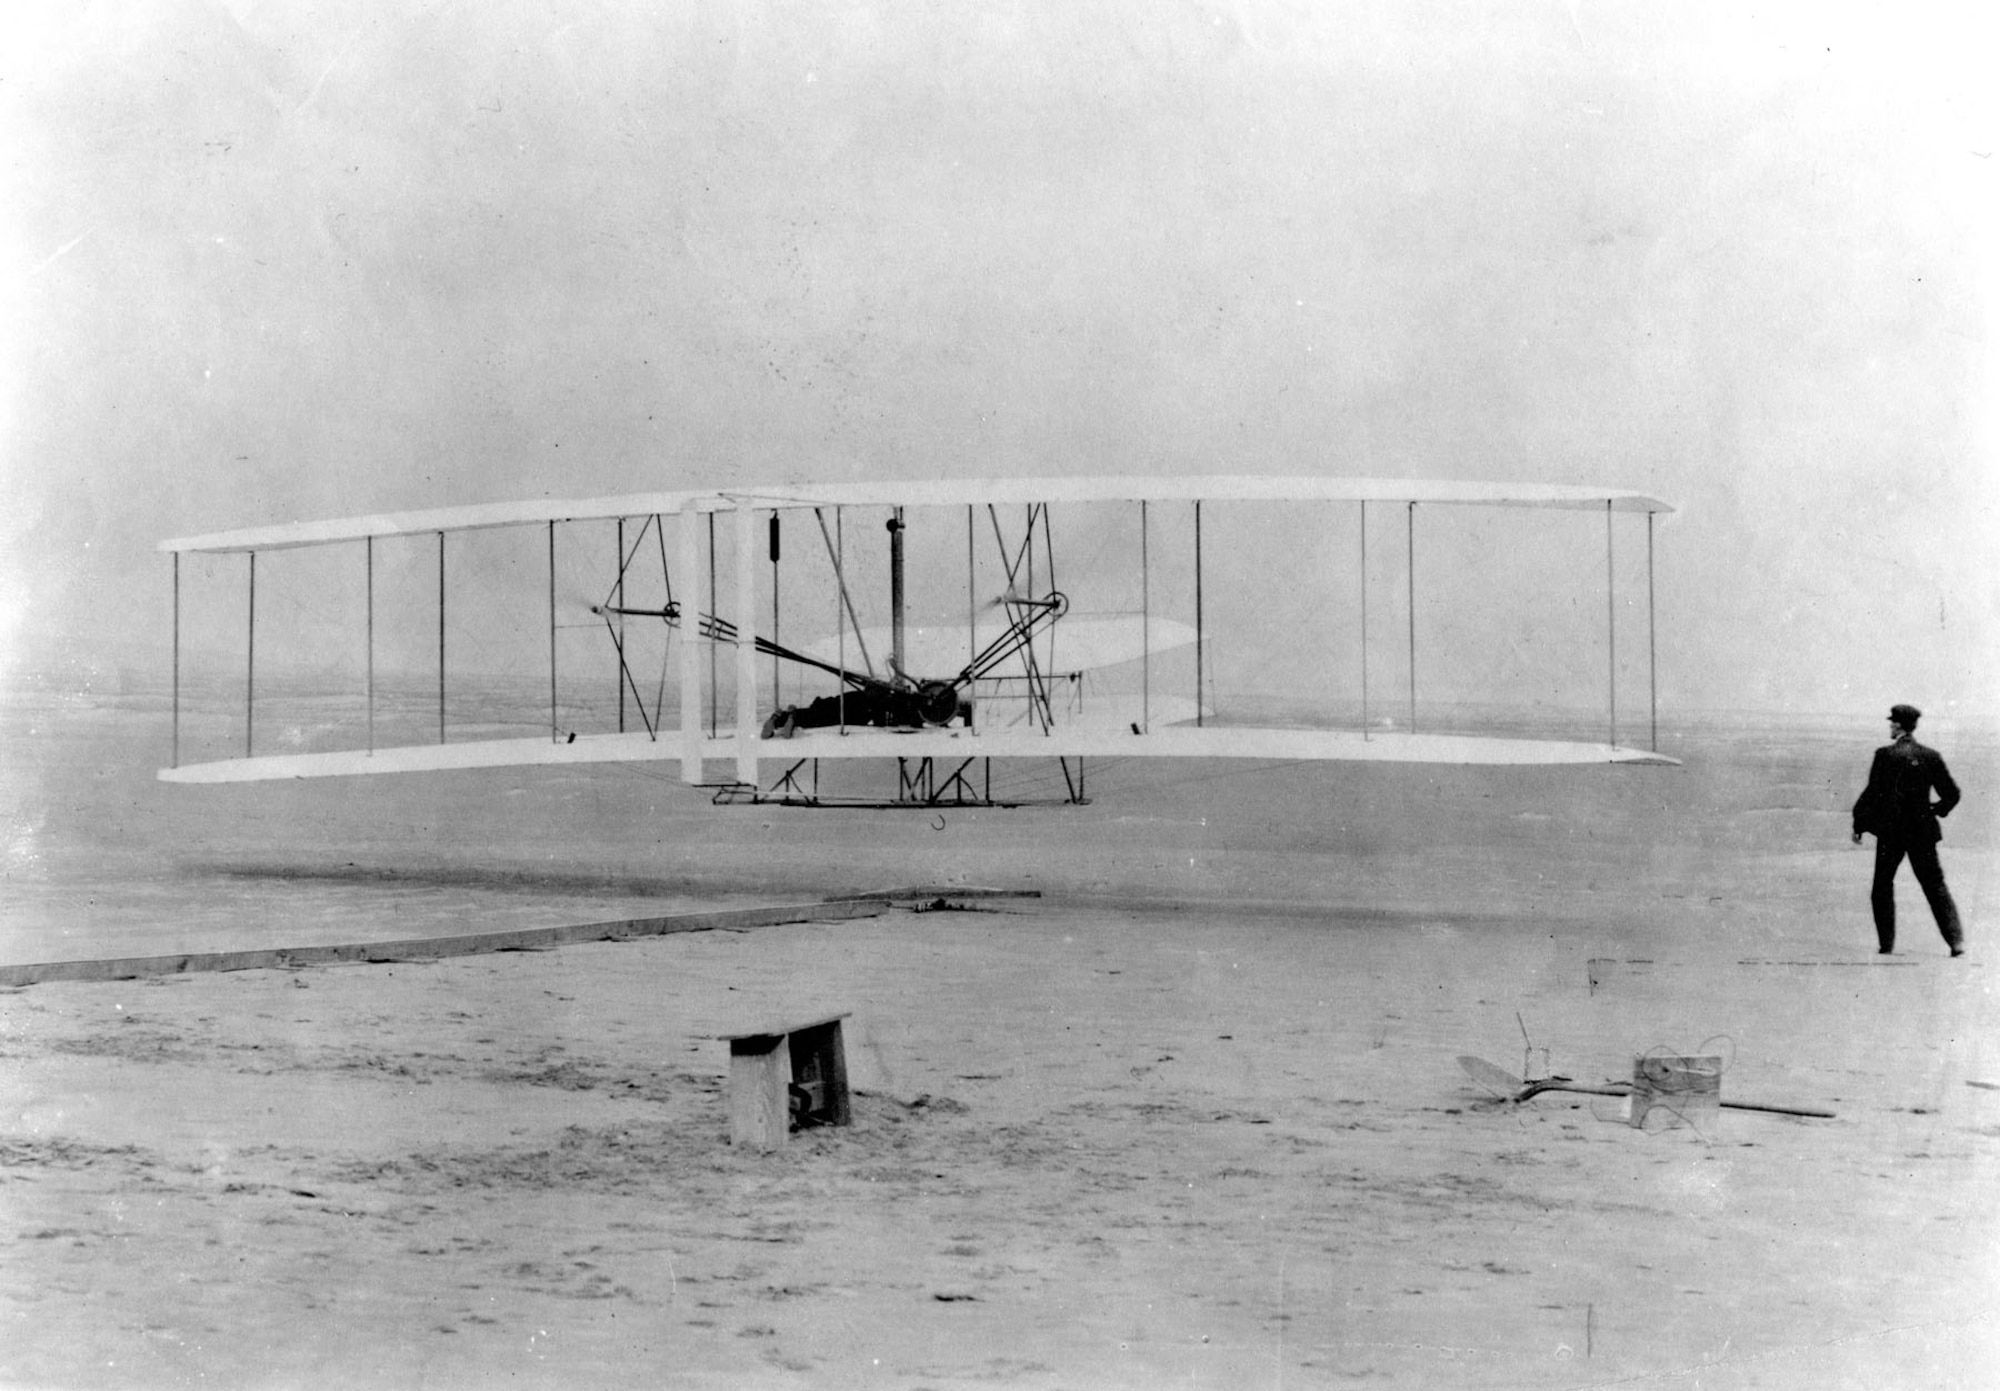 Orville and Wilbur Wright's first flight, Dec. 17, 1903, at Kittyhawk, N.C. (U.S. Air Force photo)